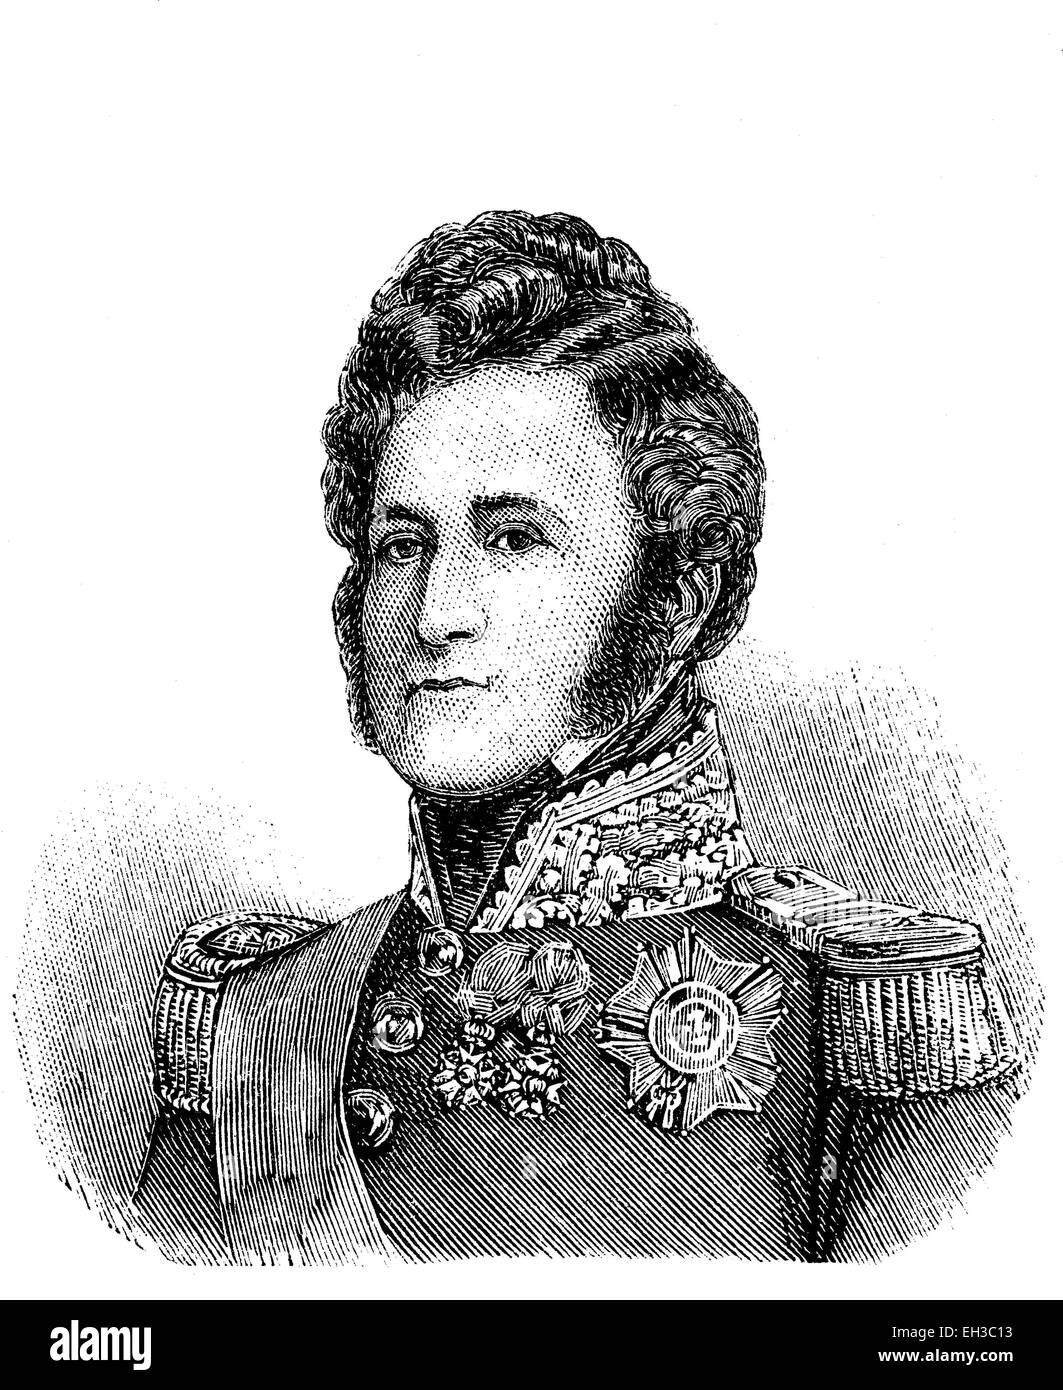 Louis-Philippe I., Ludwig Philipp I. or Louis-Philippe Ier, 1773 - 1850, also known as Roi Citoyen, French for 'citizen king', during the so-called July Monarchy he was the last king of France with the official title 'King of the French', wood engraving, around 1880 Stock Photo